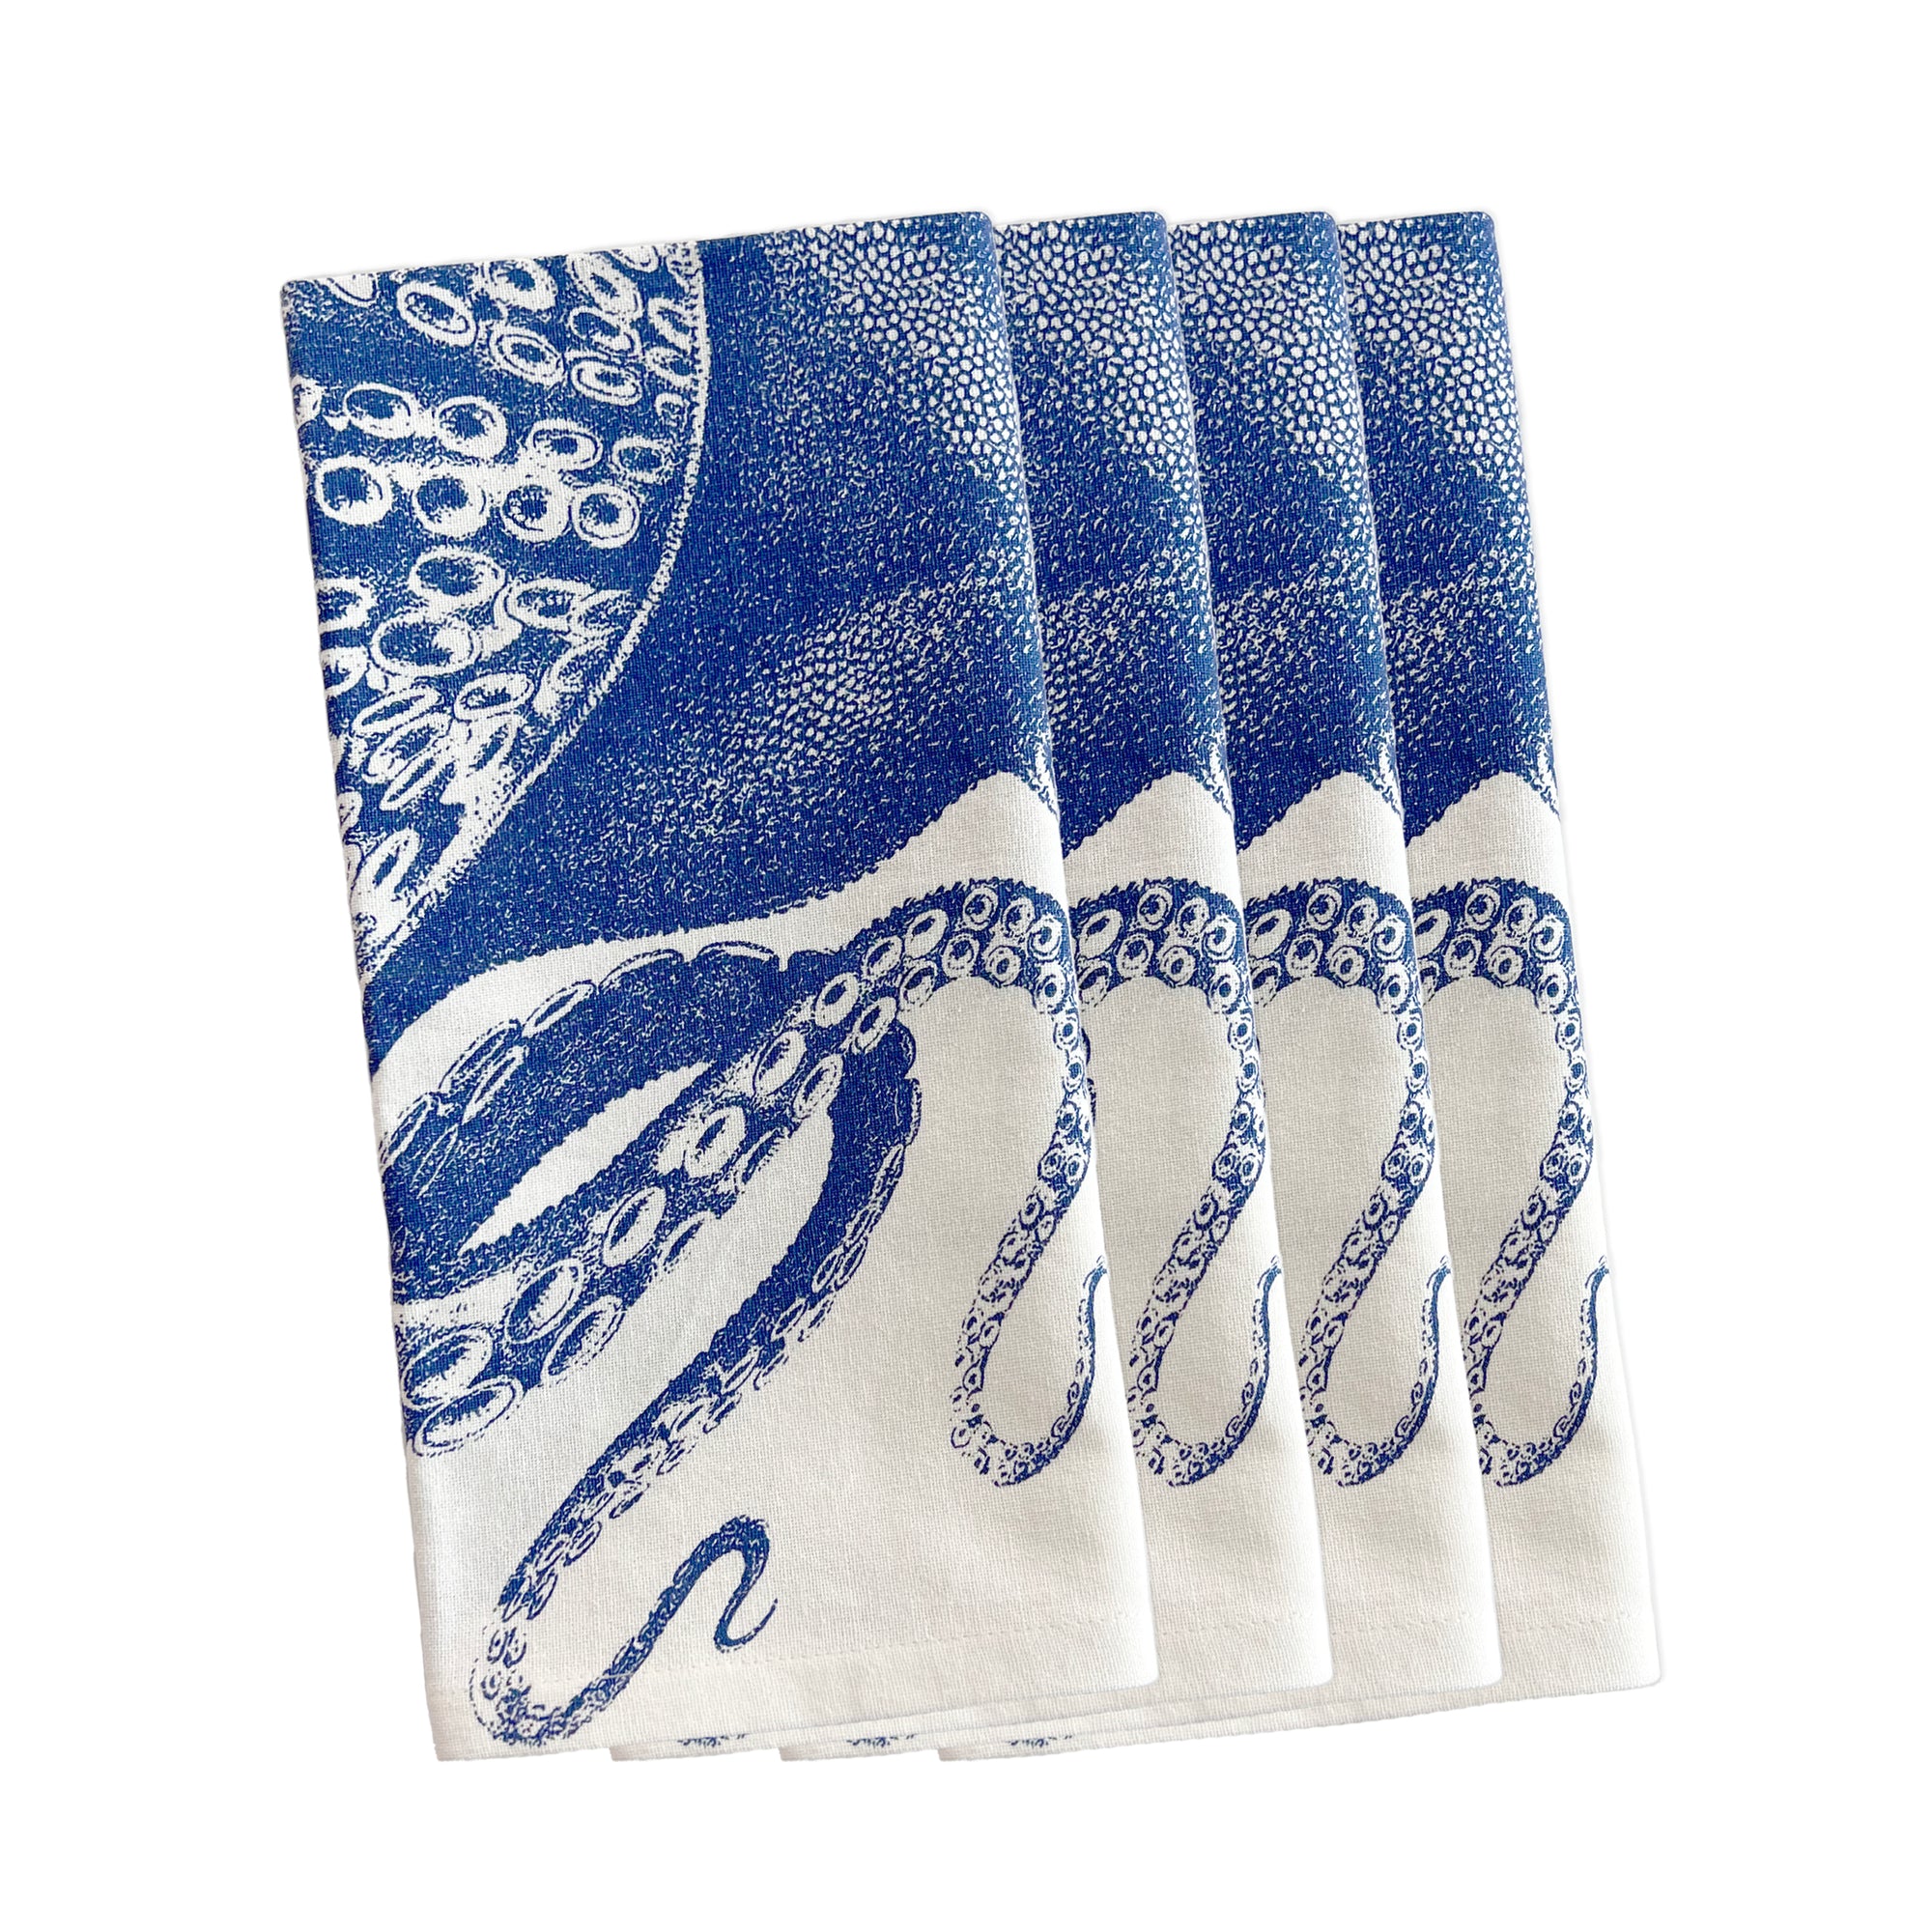 Four folded Caskata Lucy Dinner Napkins, Set of 4, with a blue octopus illustration printed on them, seamlessly blending into your blue and white table linens.